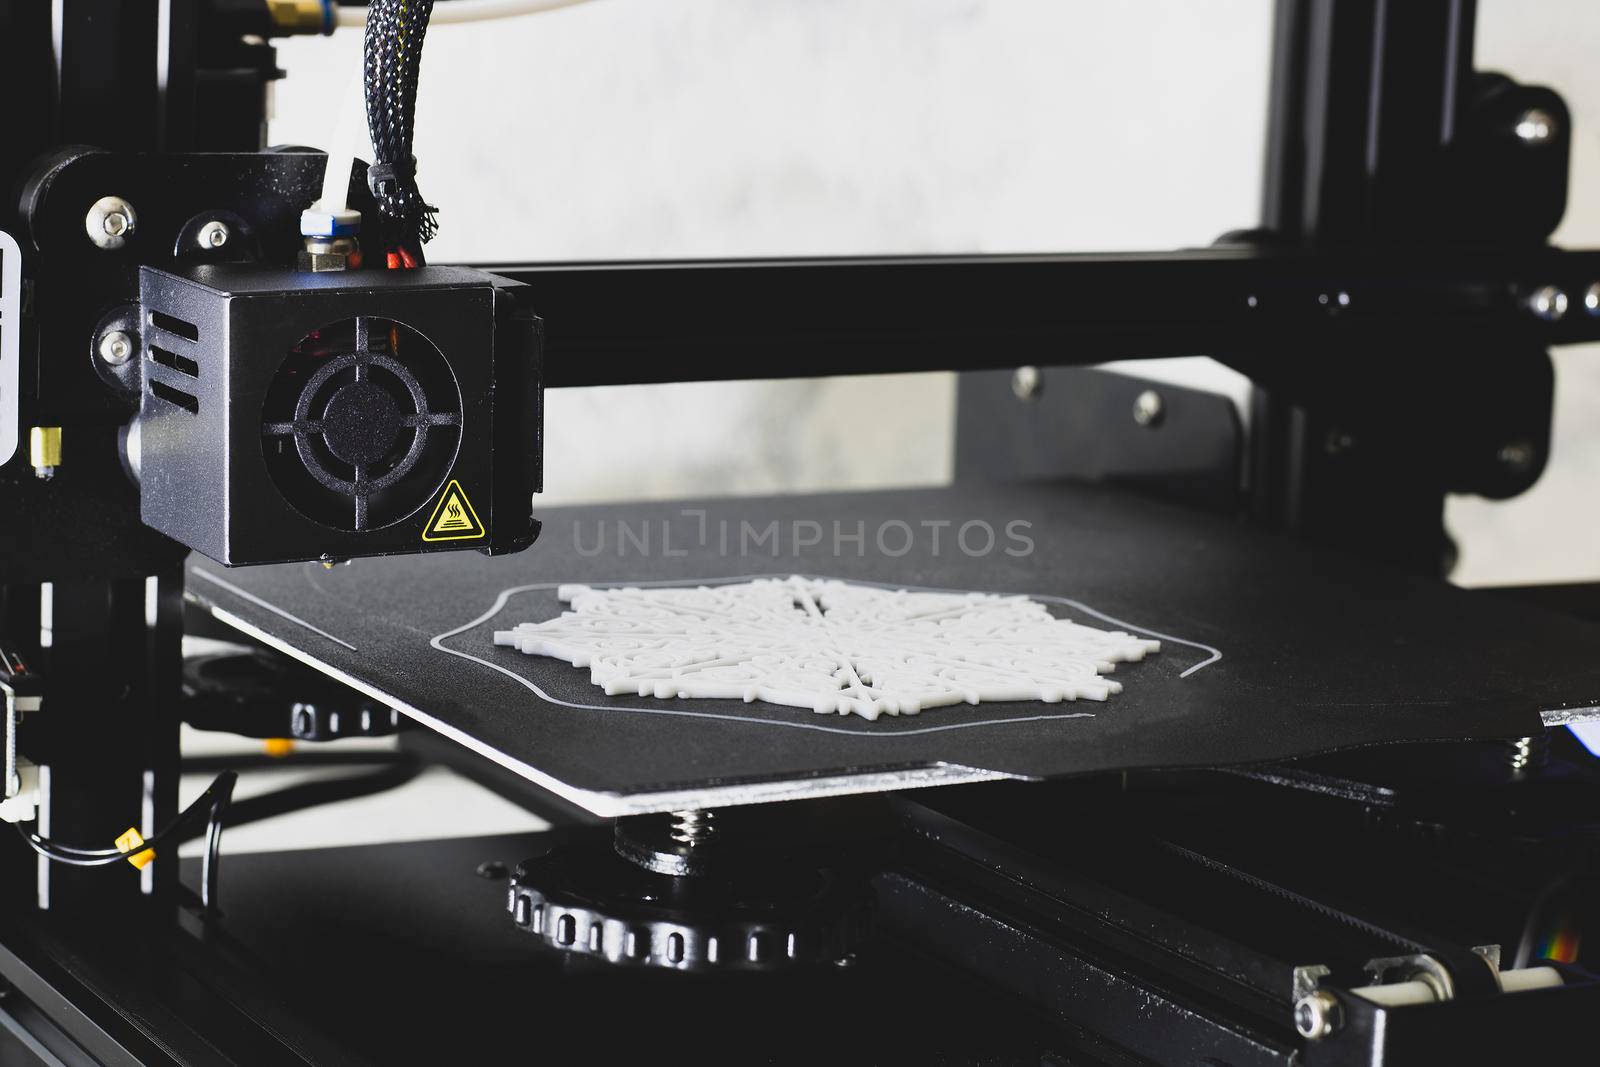 Snowflake printing on a 3D printer, 3D print details. Black and white image.